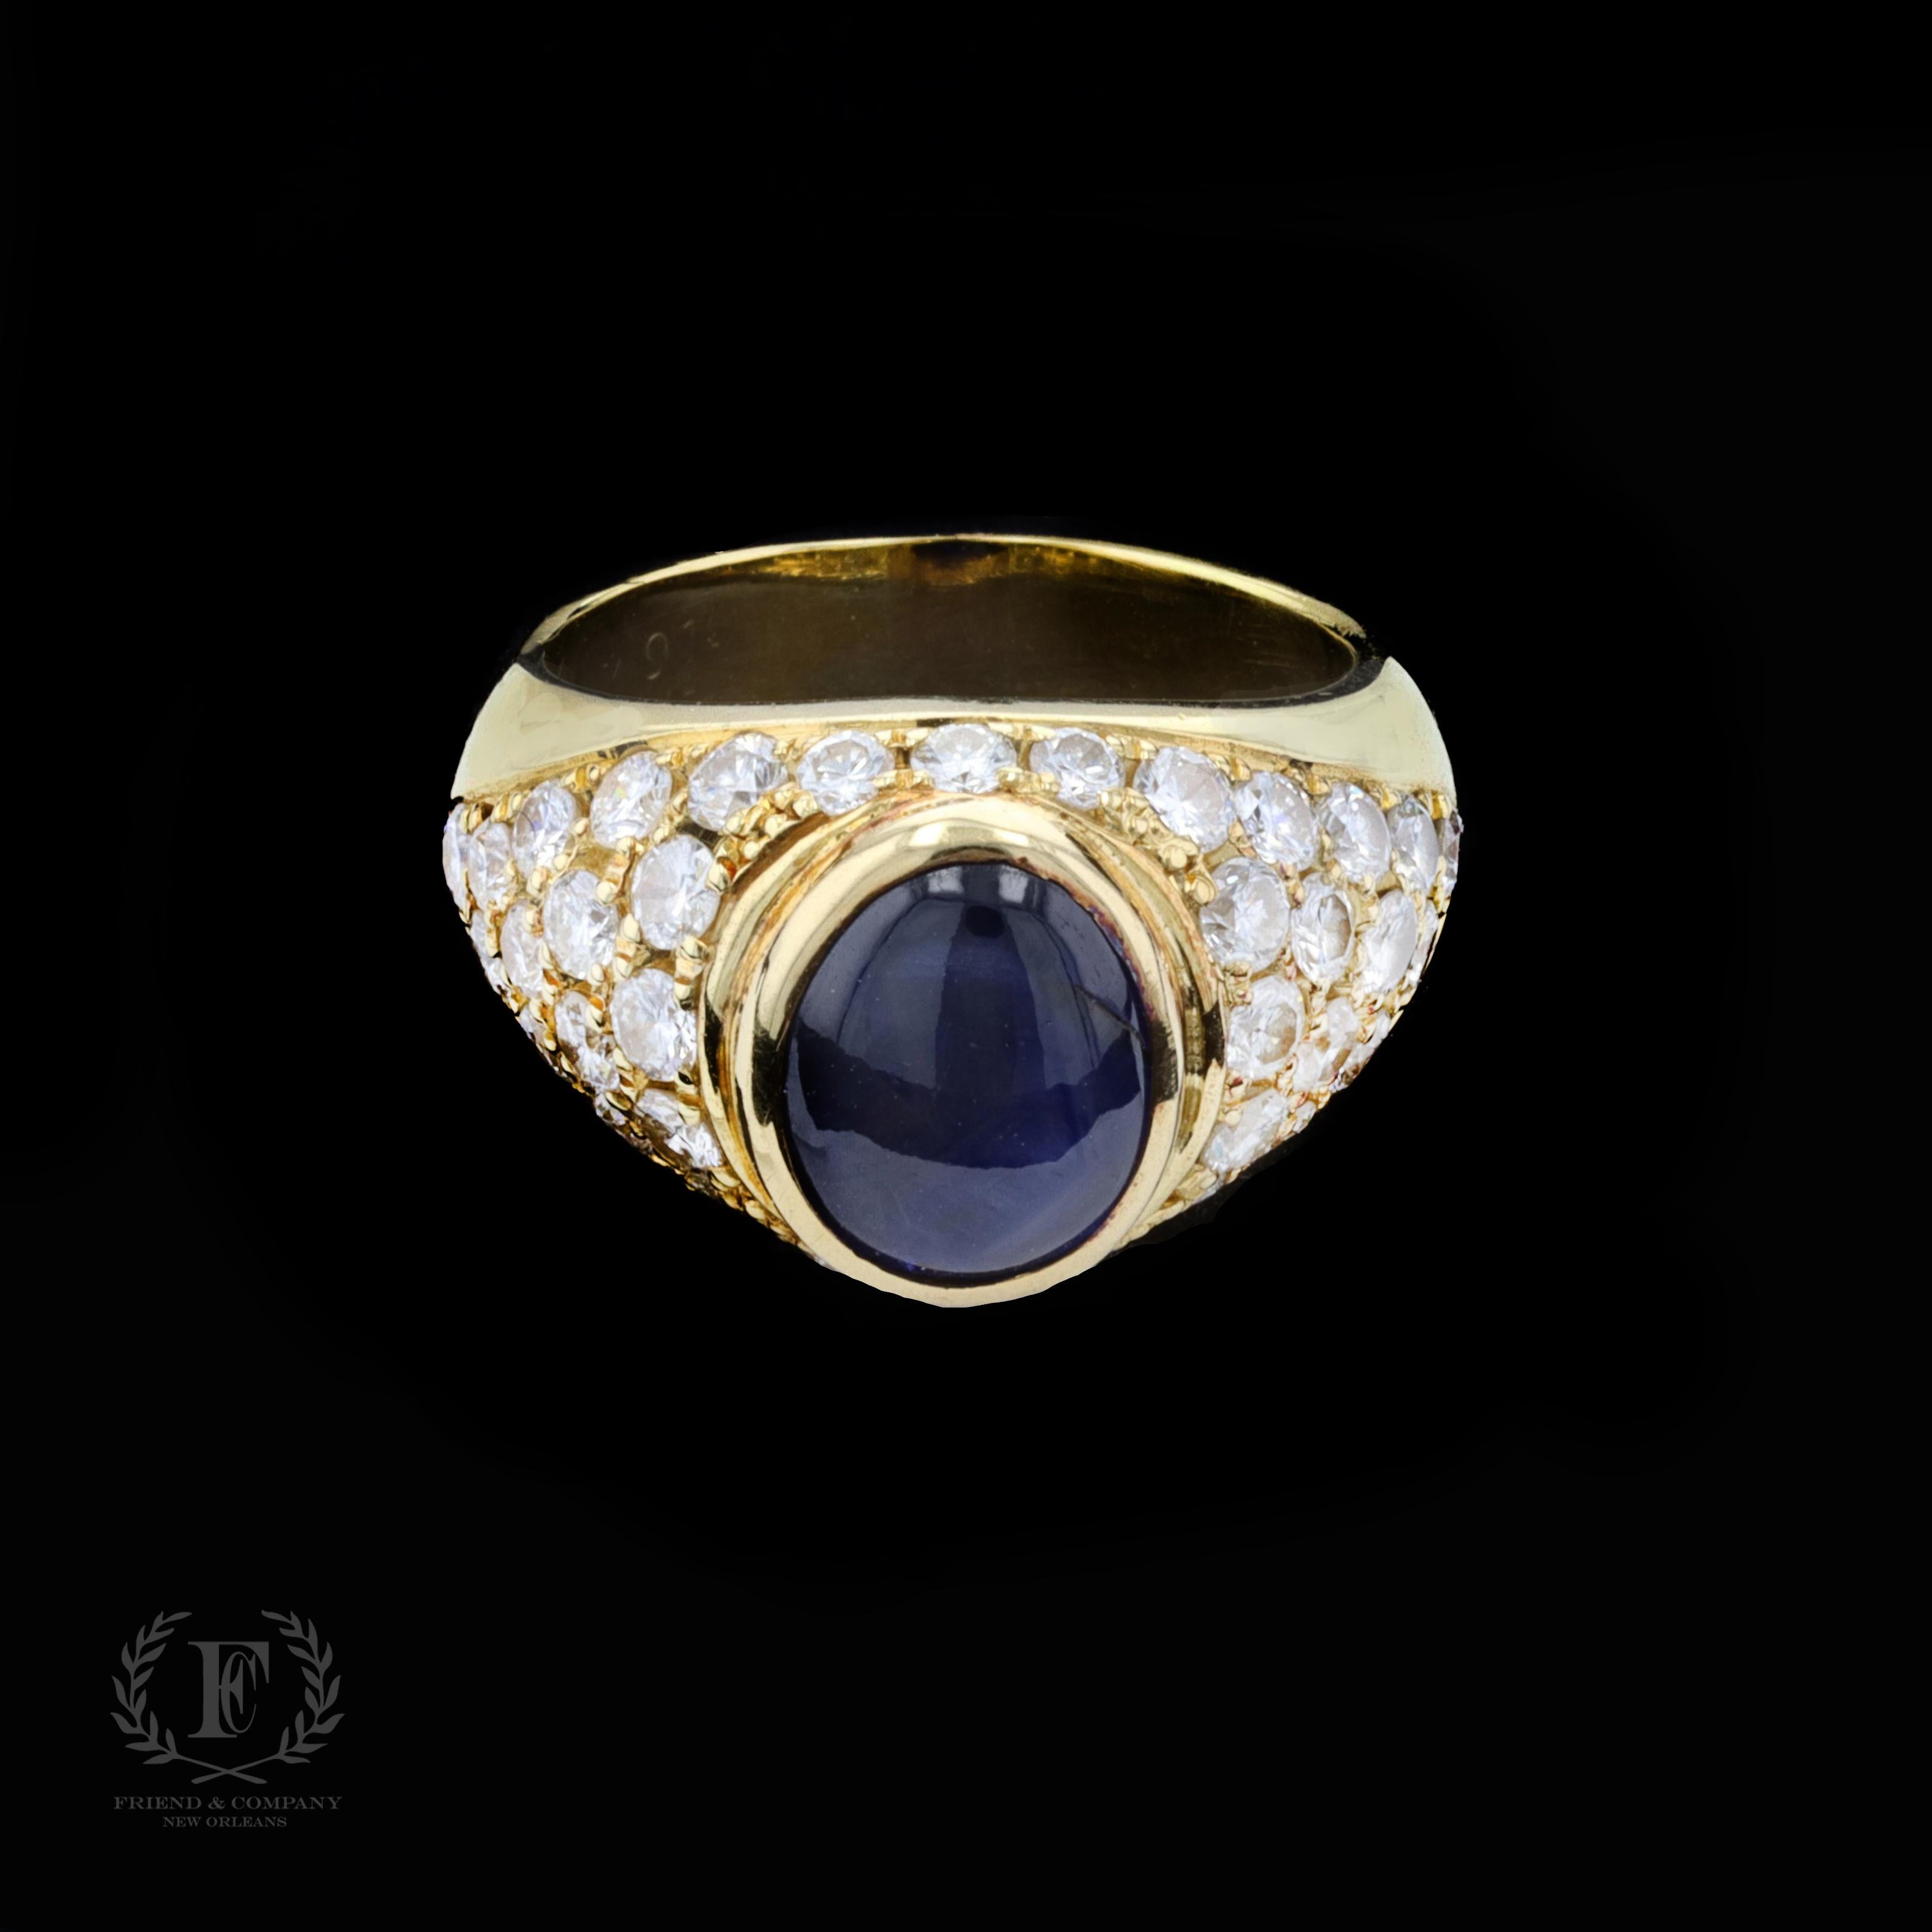 The dazzling estate ring is centered with one cabochon cut blue sapphire that weighs approximately 4.00 carats. The sapphire is accentuated by round cut diamonds that weigh approximately 1.85 carats total. The color of the diamonds is G, and the